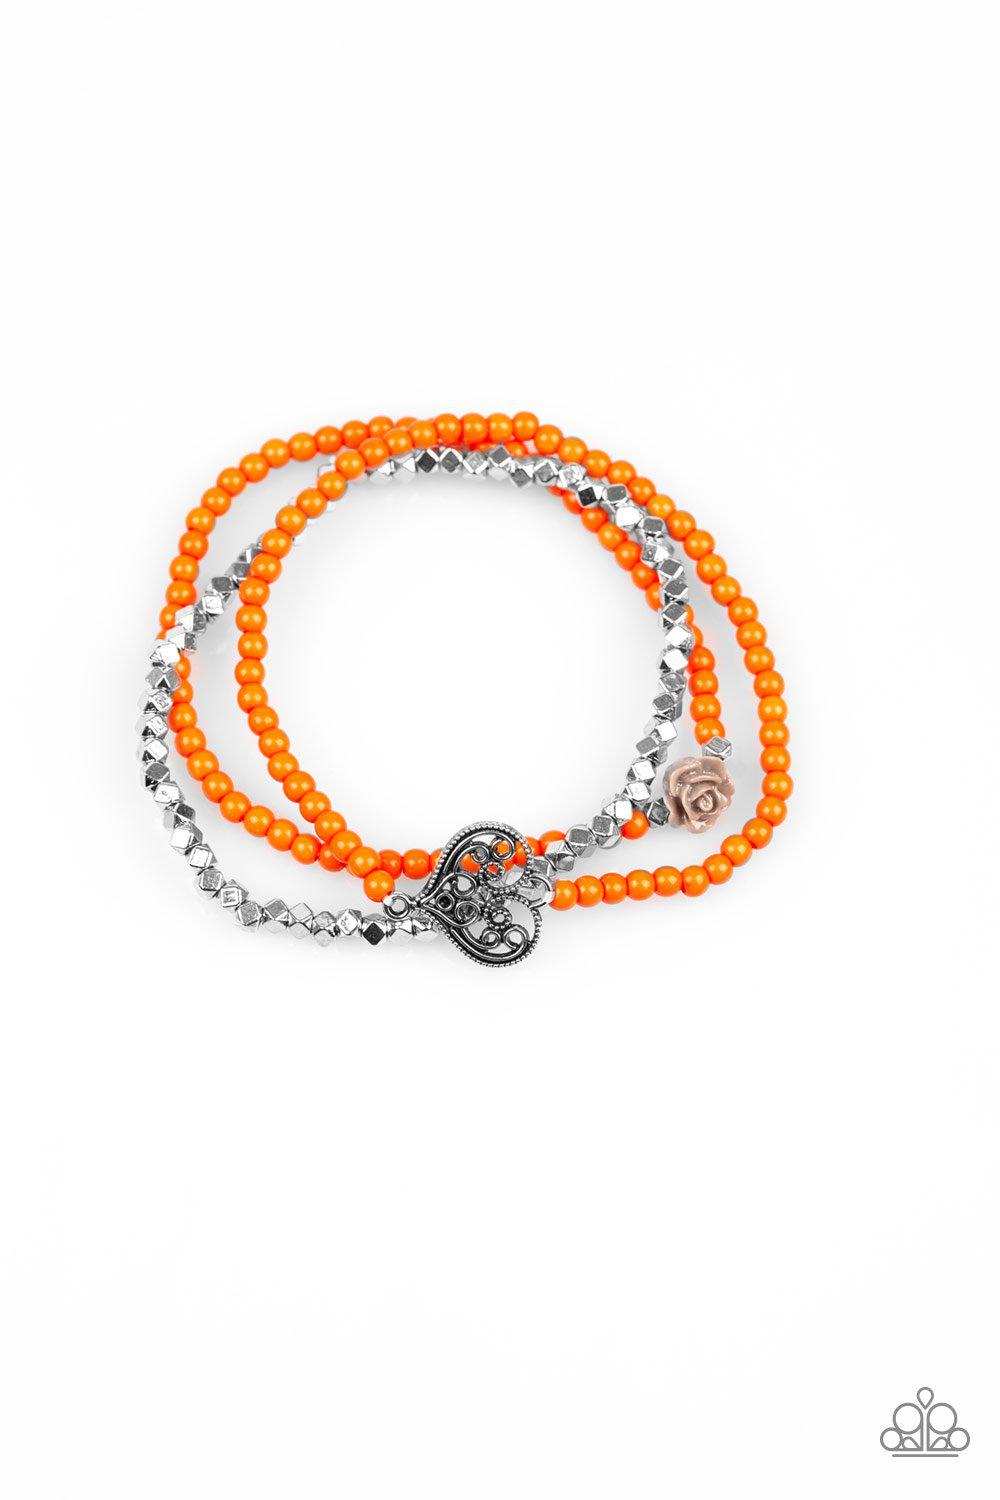 Lovers Loot Orange and Silver Bracelet Set - Paparazzi Accessories-CarasShop.com - $5 Jewelry by Cara Jewels